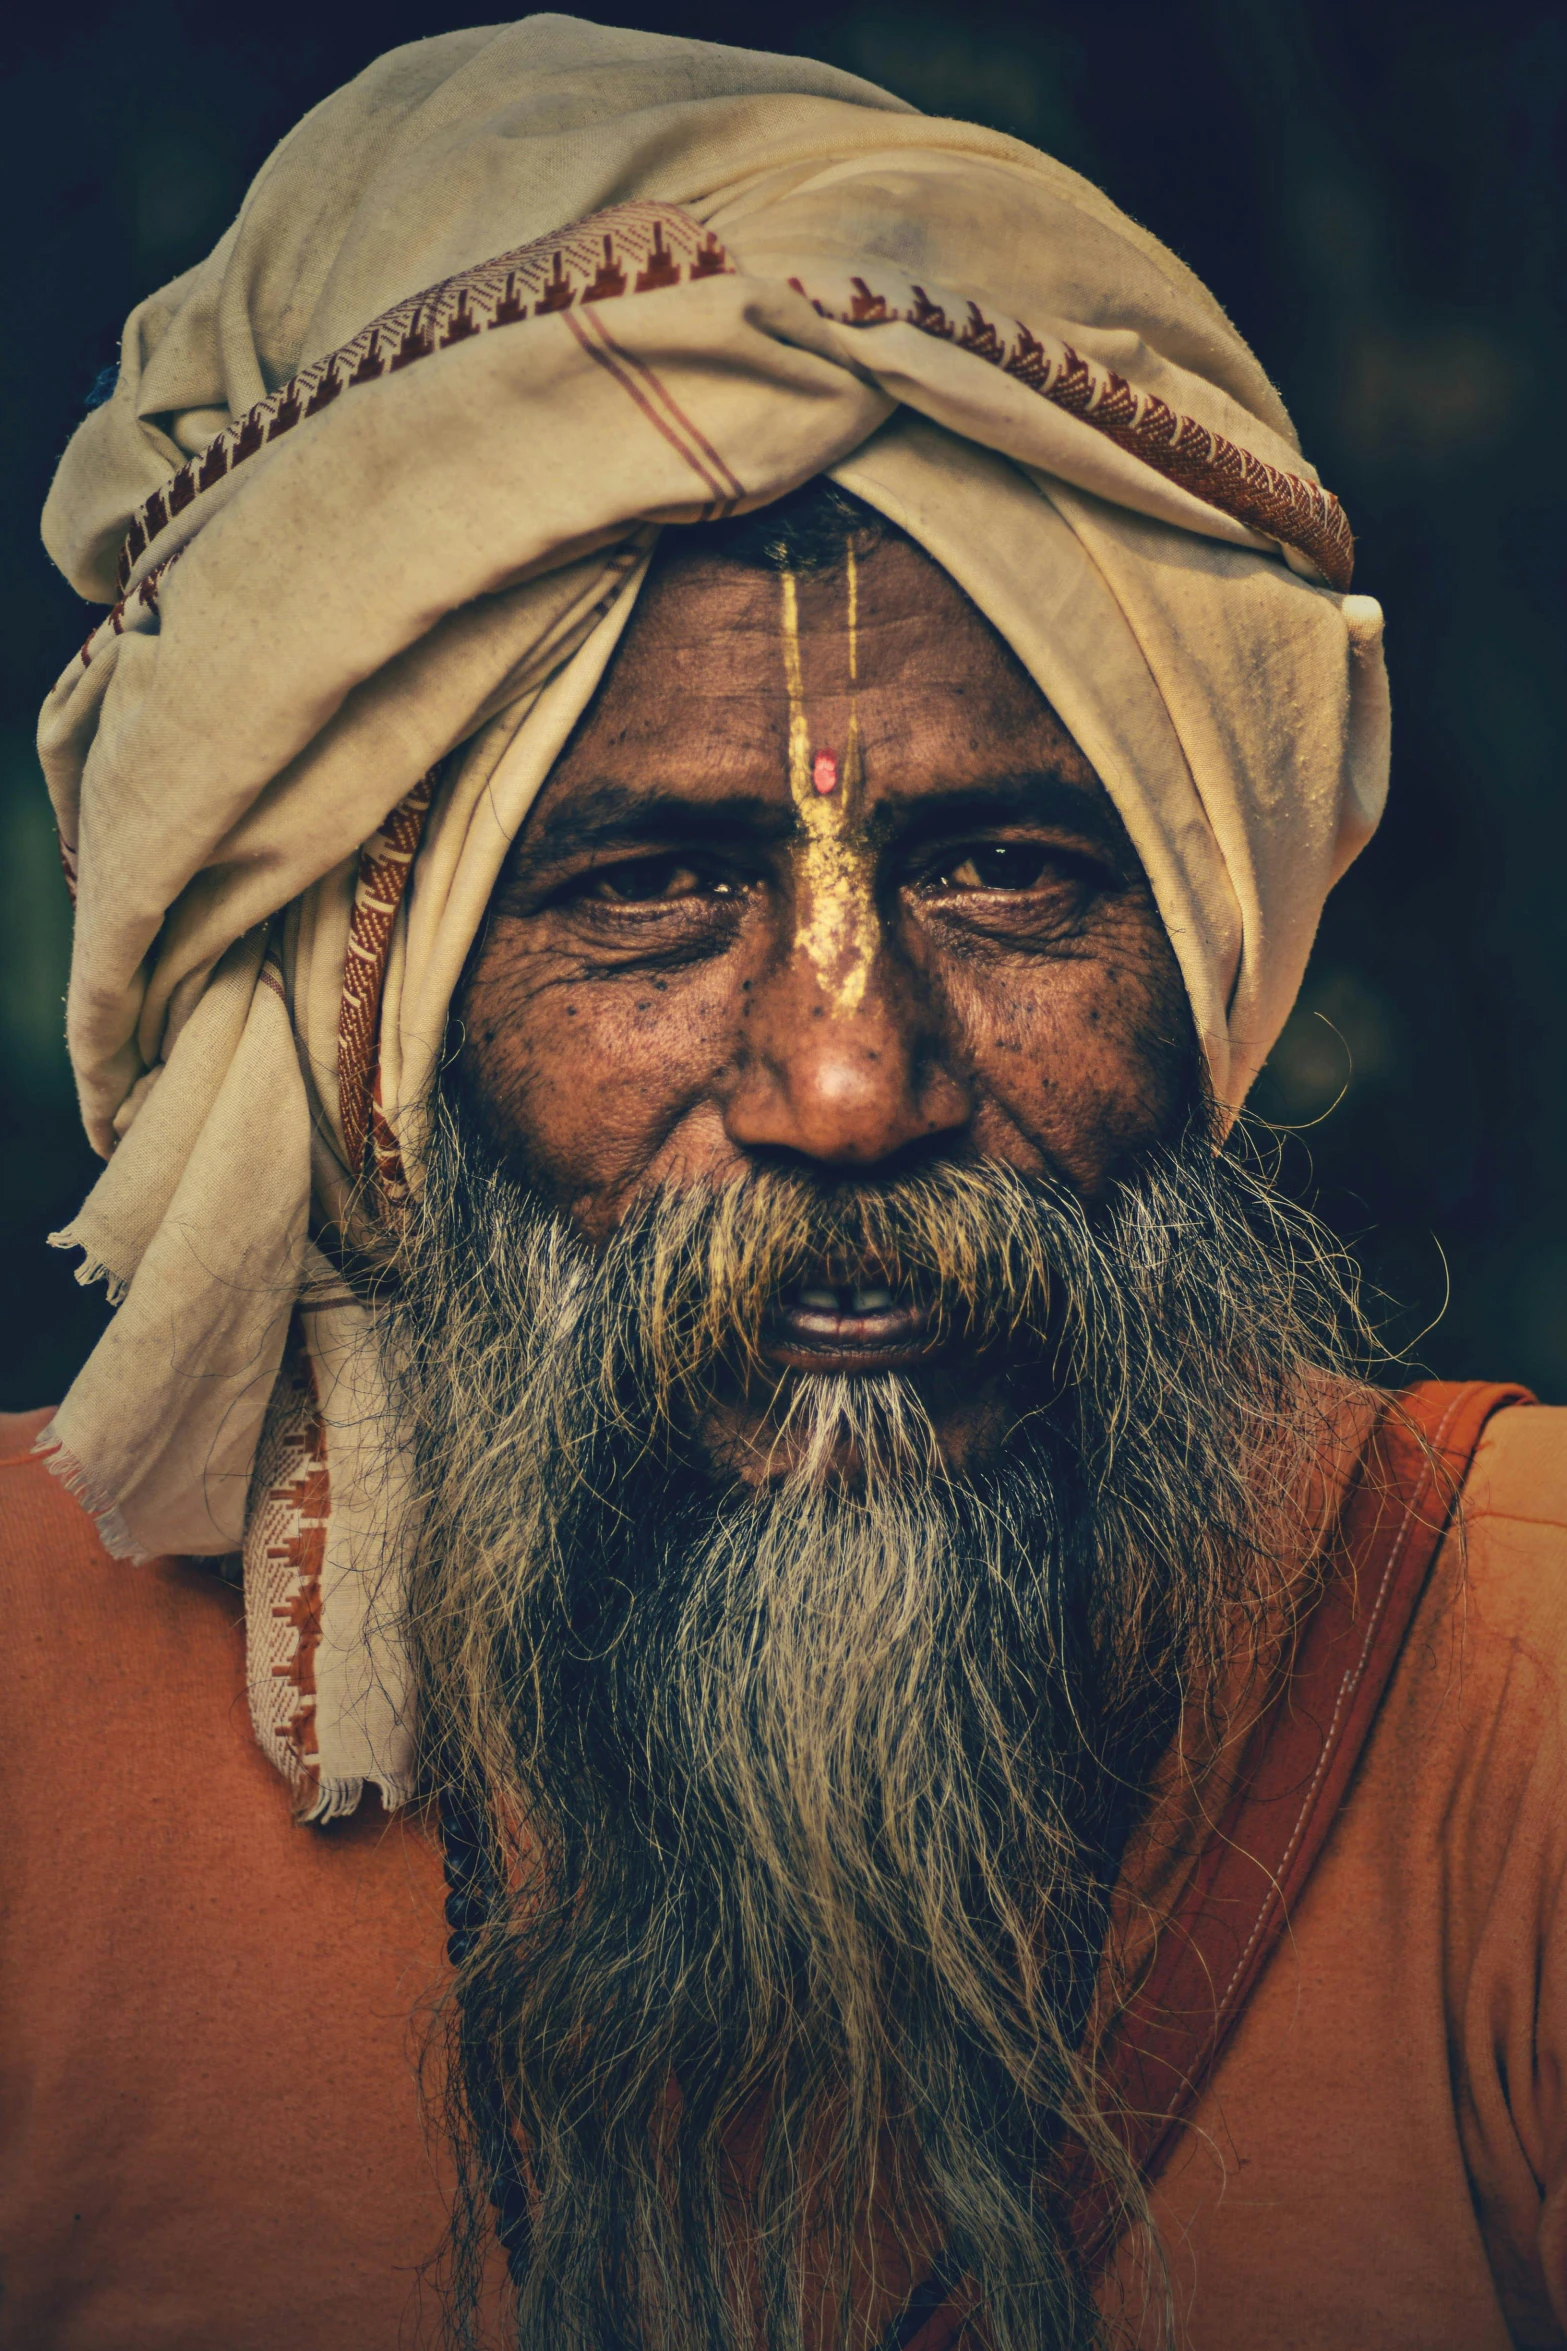 an old man with a beard wearing a turban and looking into the camera